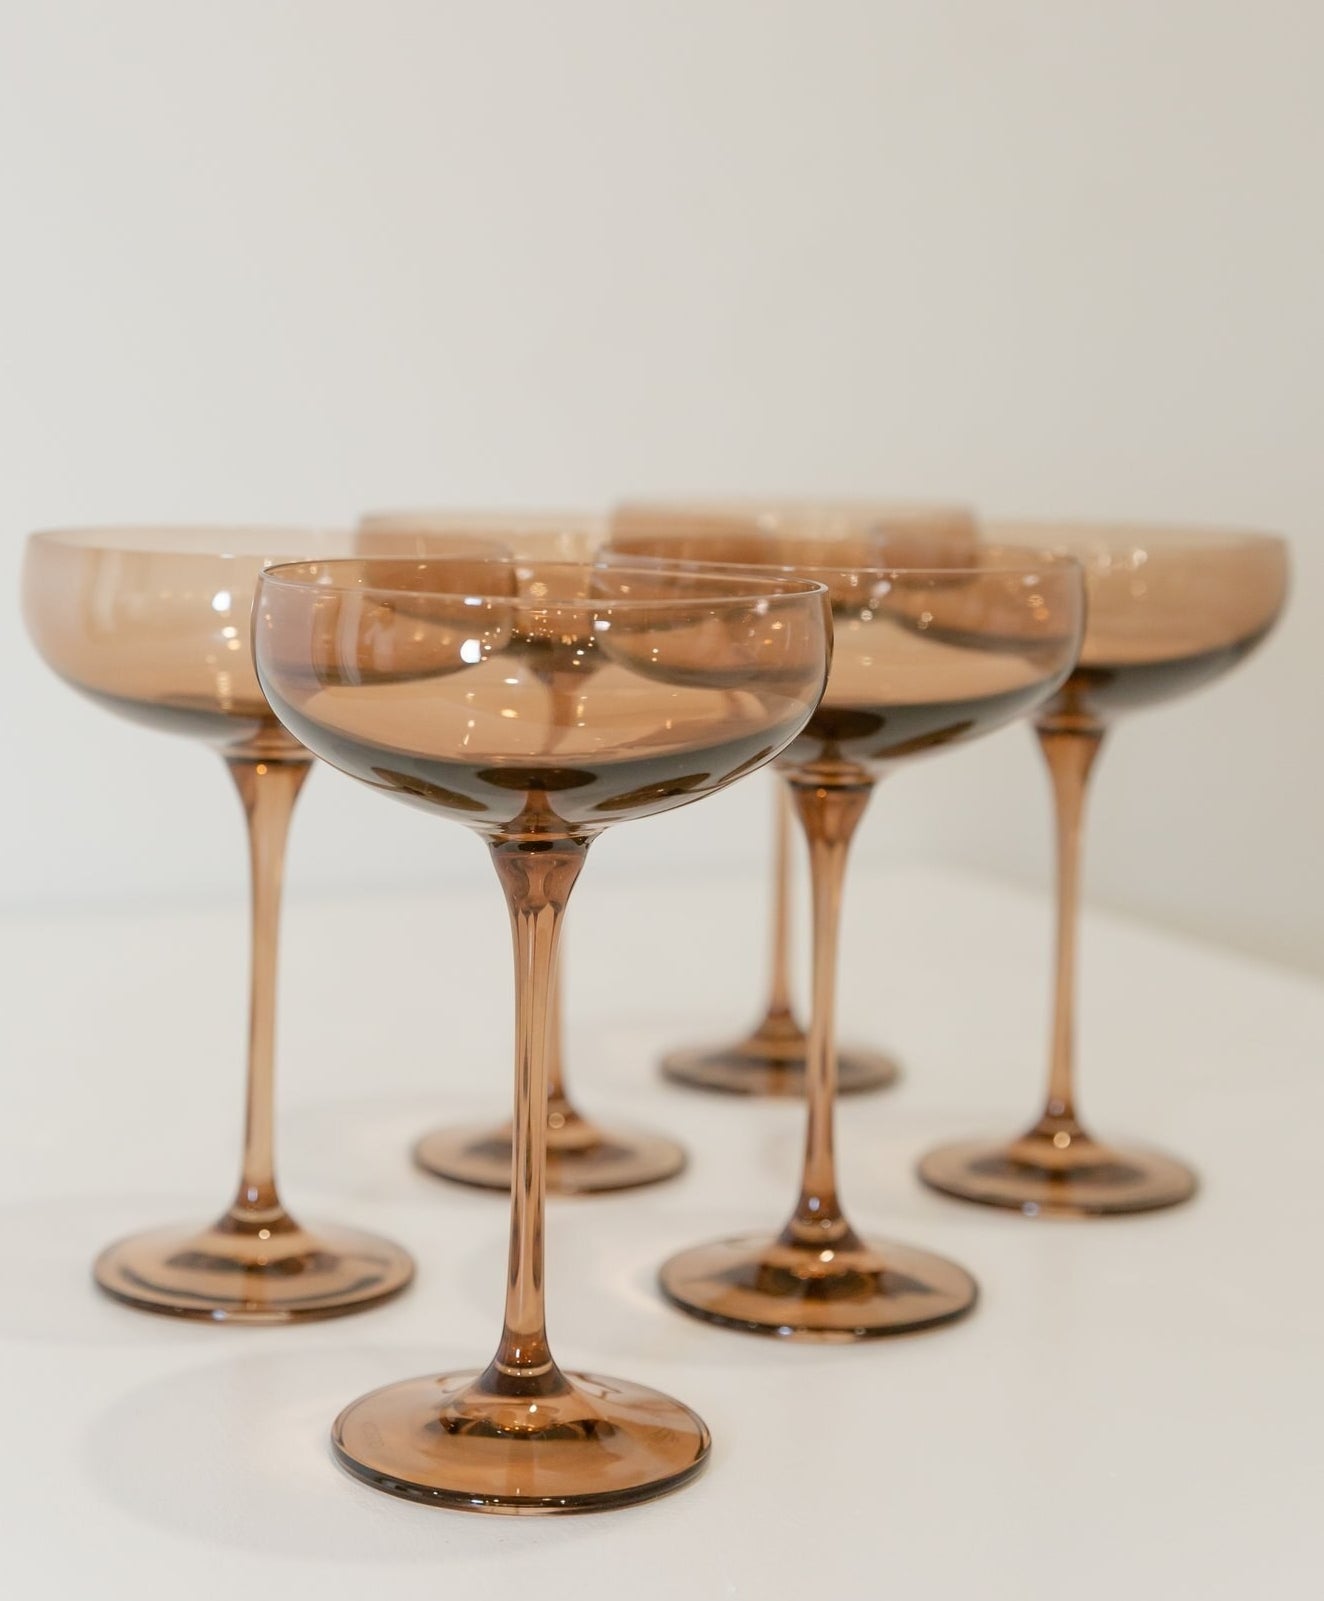 Multiple wine glasses in an amber color